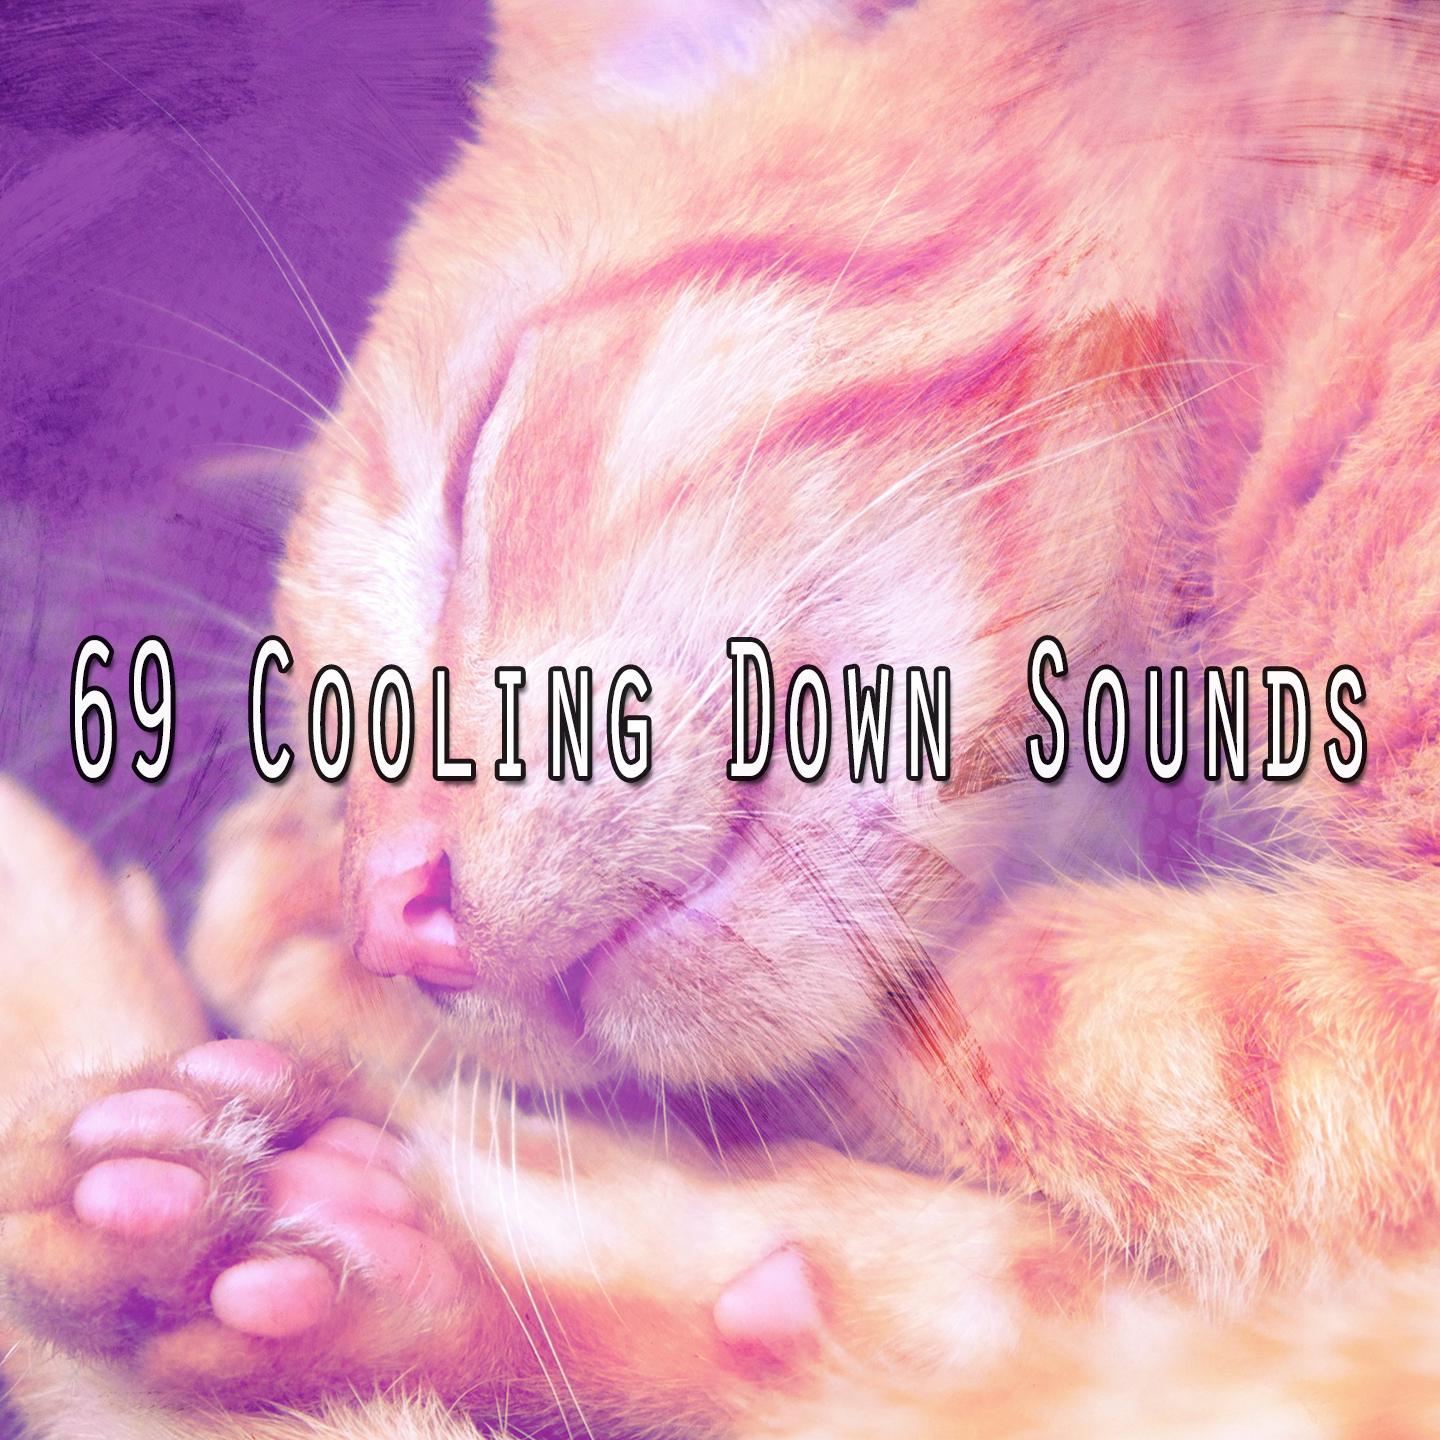 69 Cooling Down Sounds